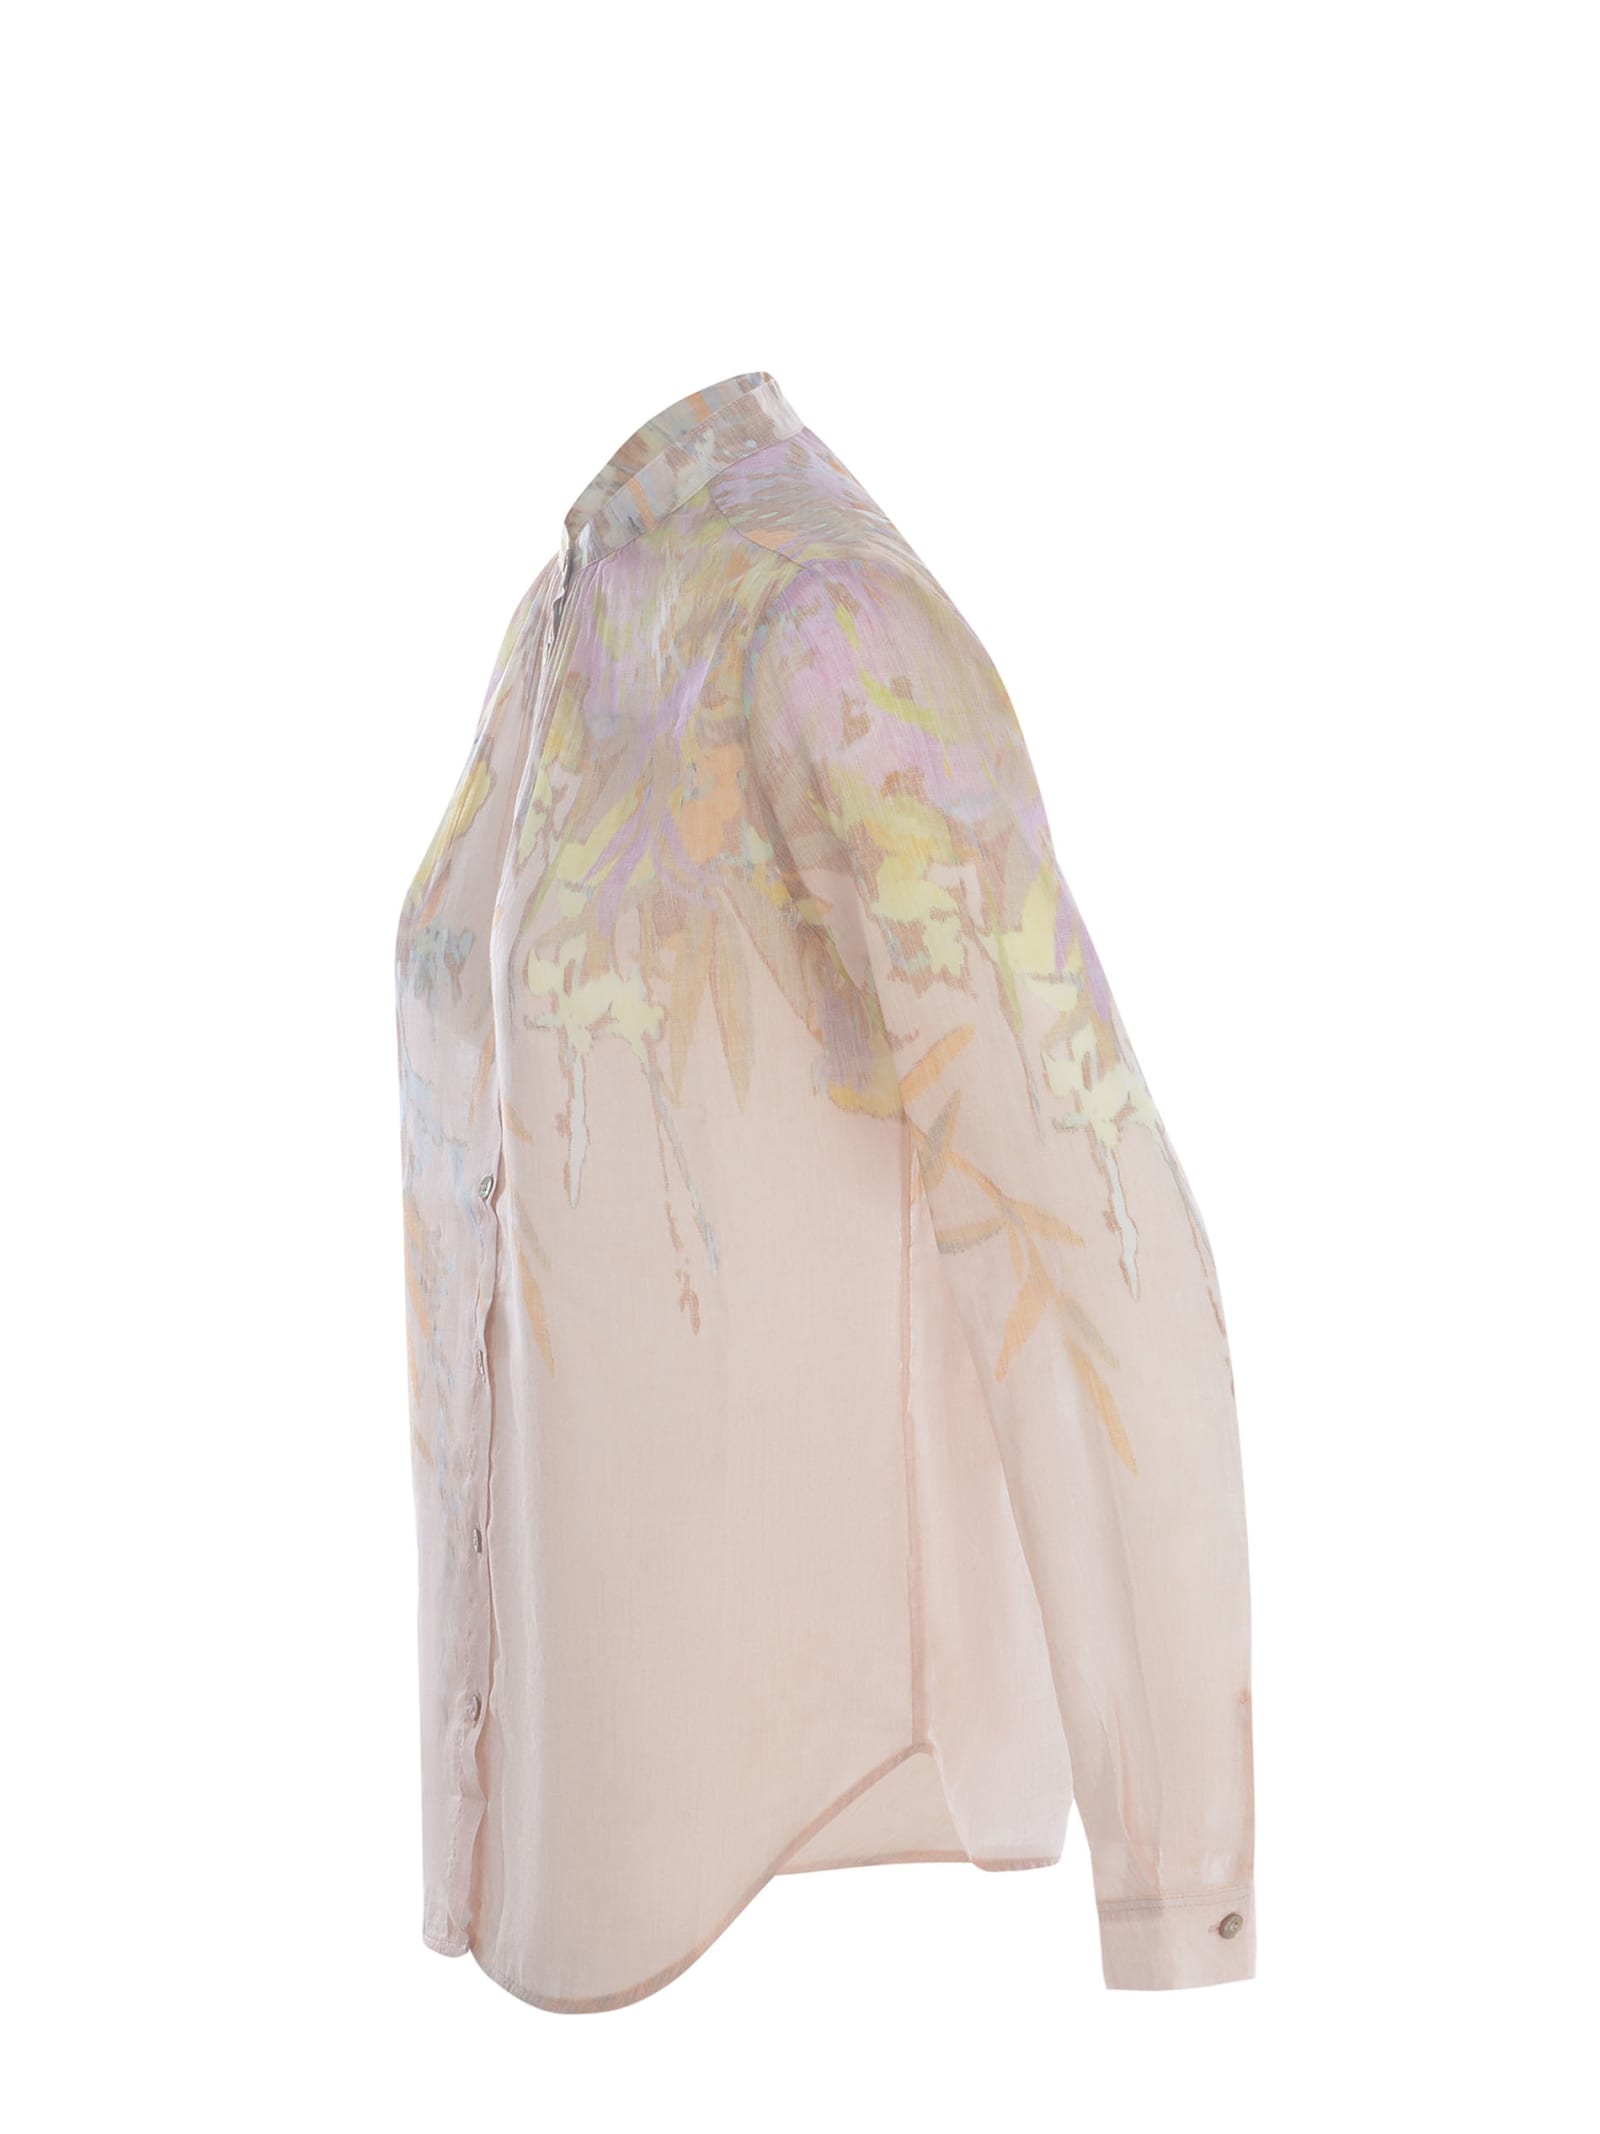 Shop Forte Forte Shirt  Made Of Cotton And Silk Muslin In Rosa Cipria